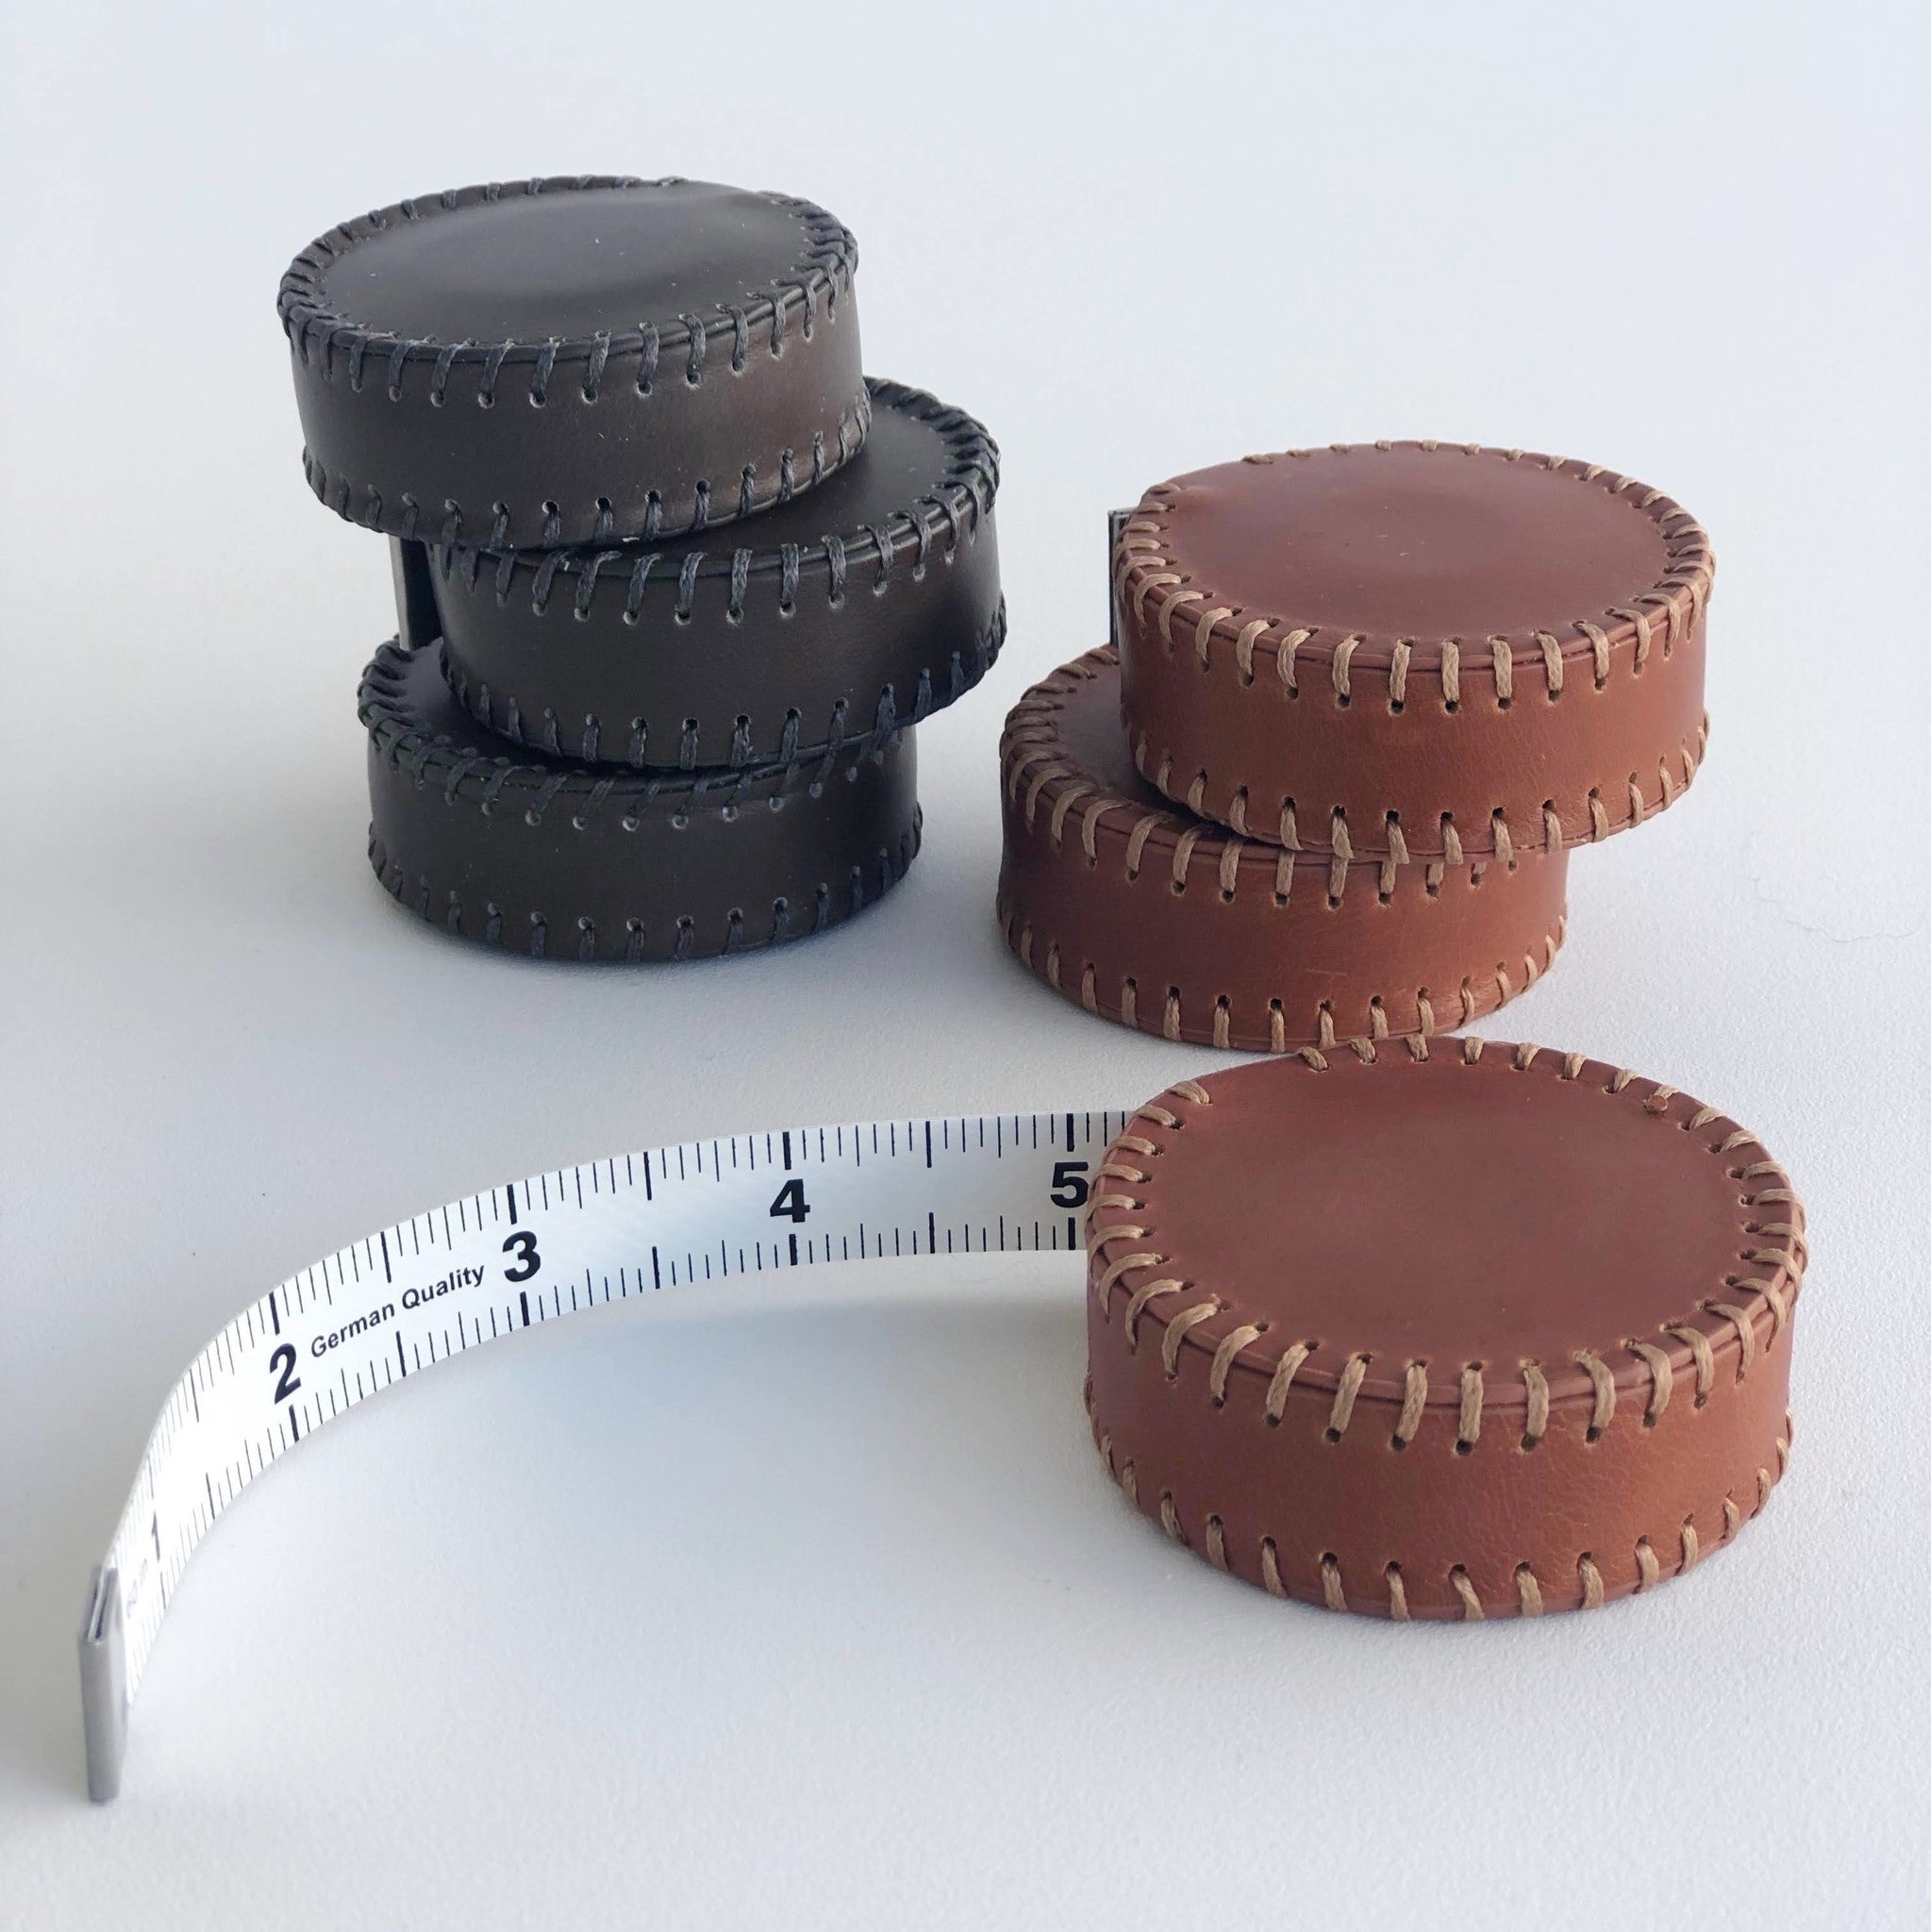 Handsewn Leather Covered Tape Measure For Tailoring, Sewing